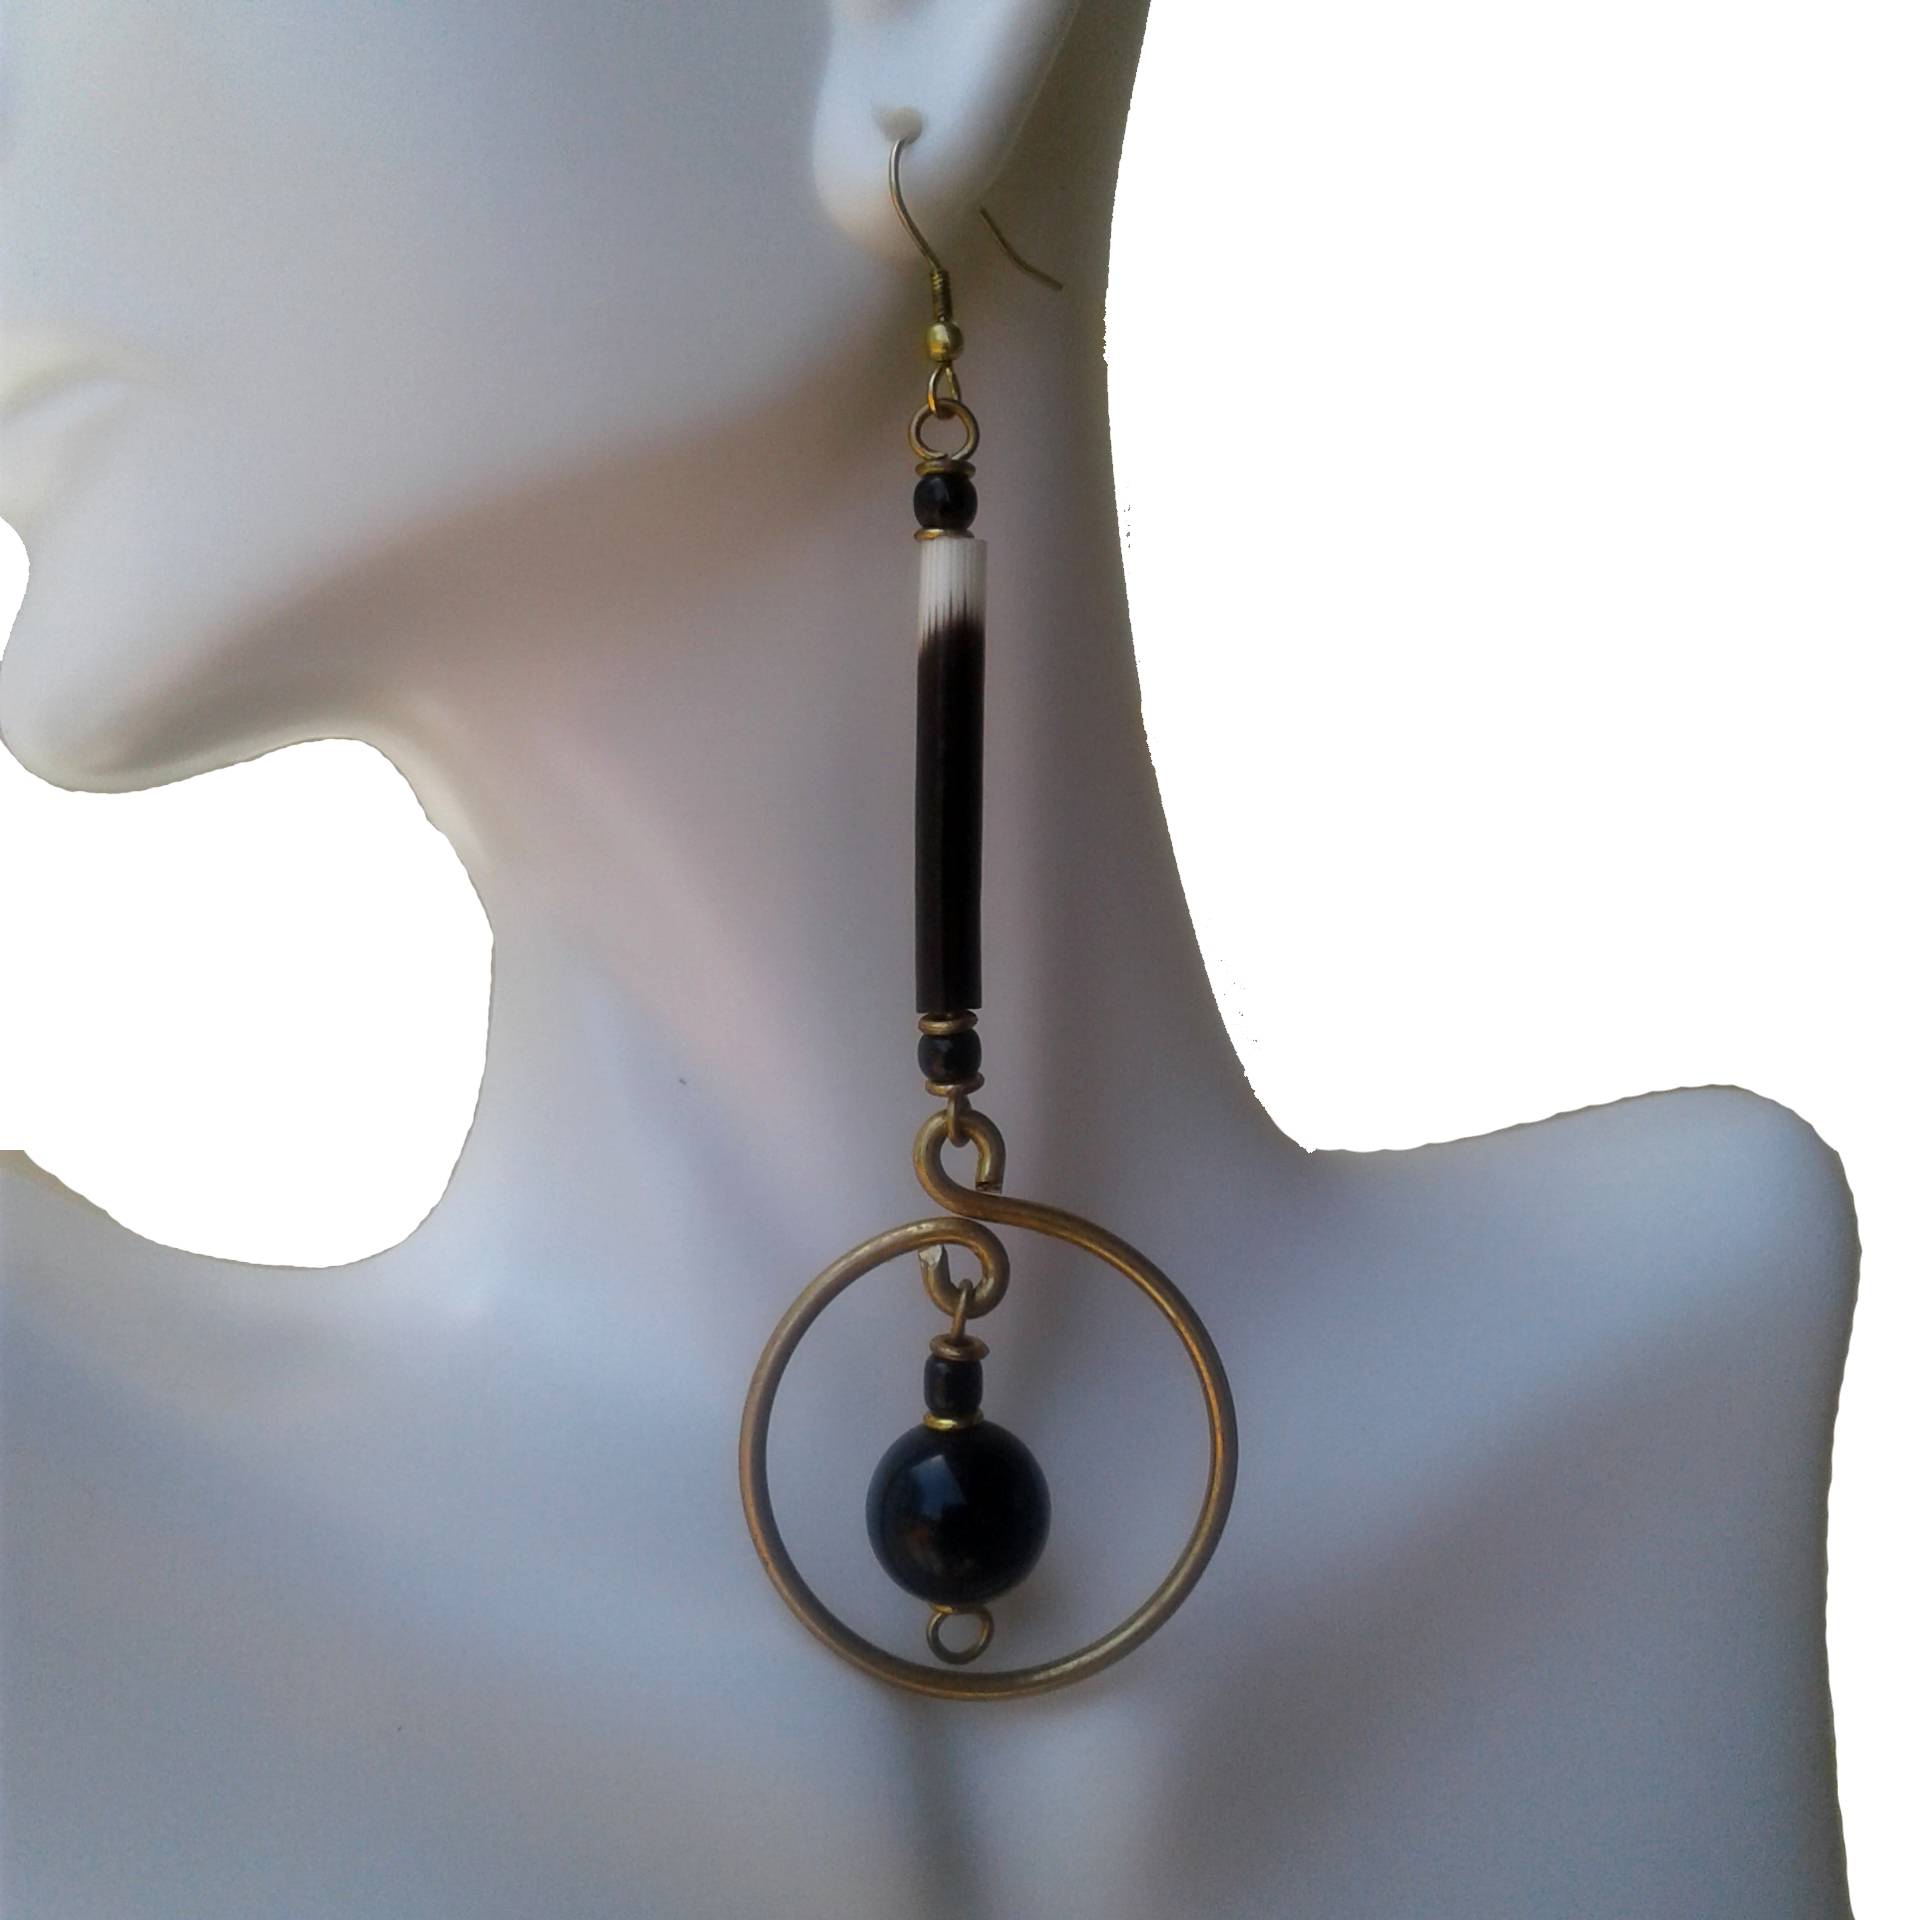 Porcupine Quill Earrings with a small hoop